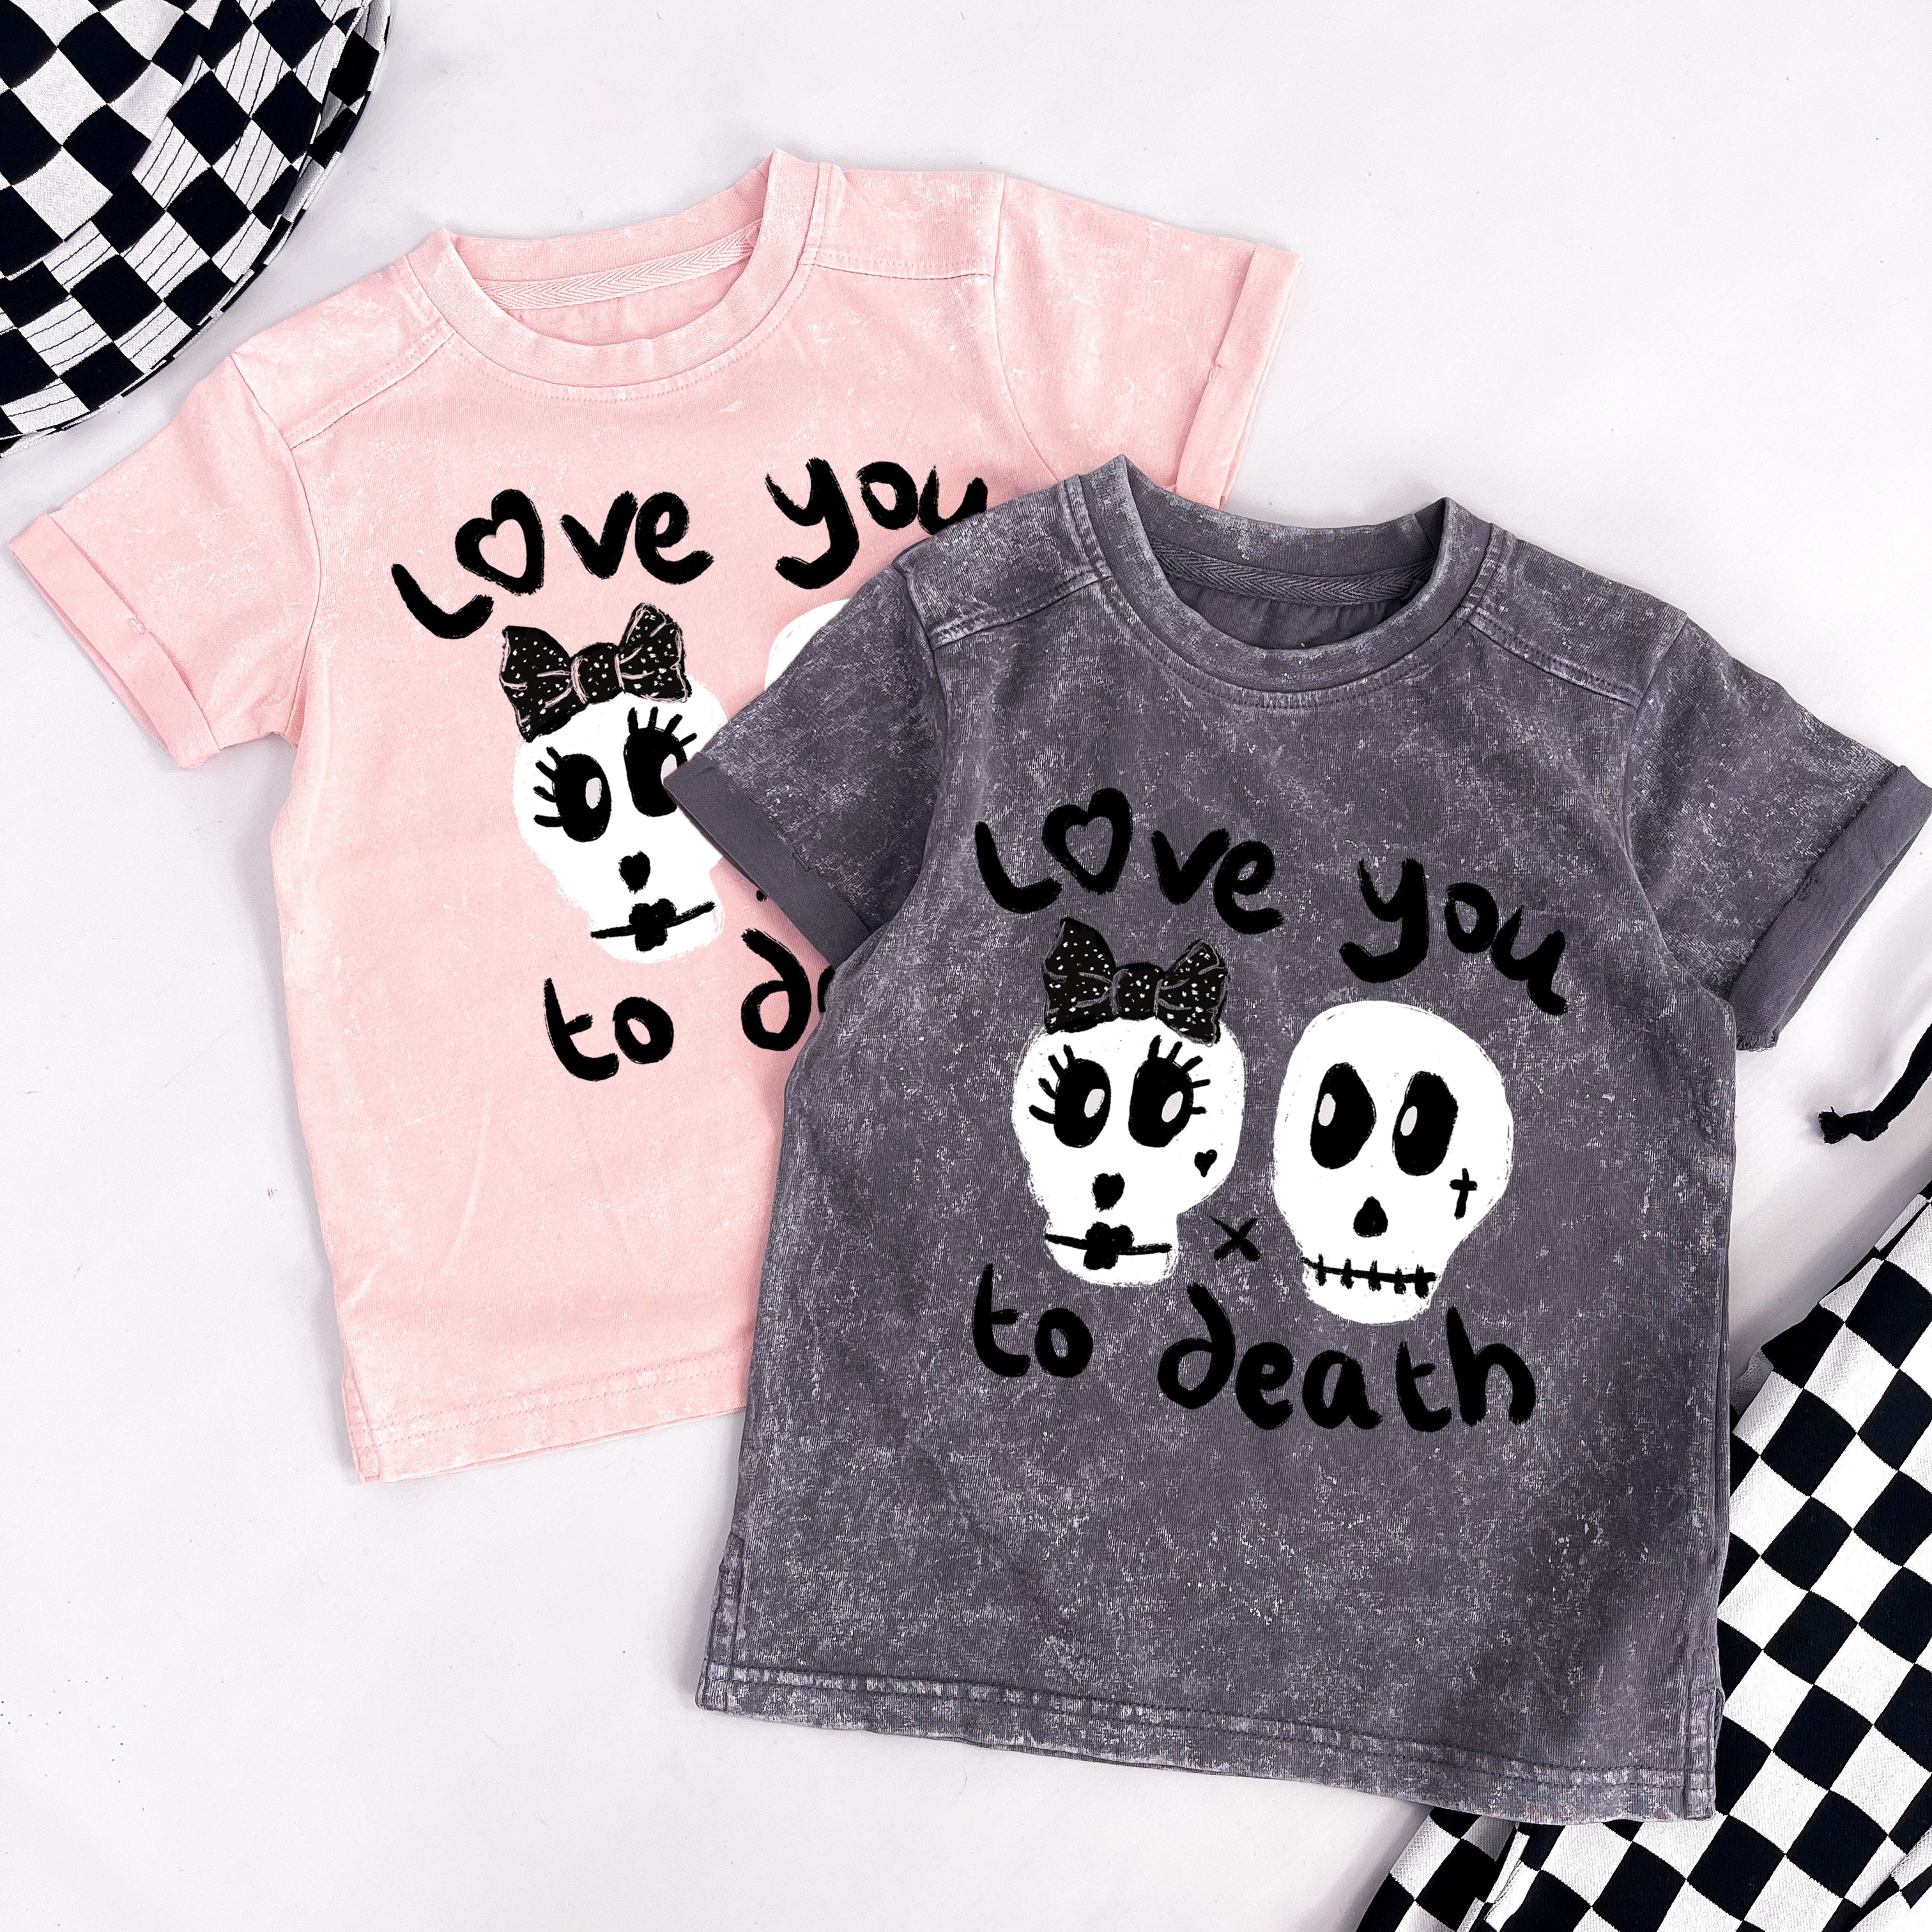 Kids Tee Shirt - Distressed Style with Love You To Death Design